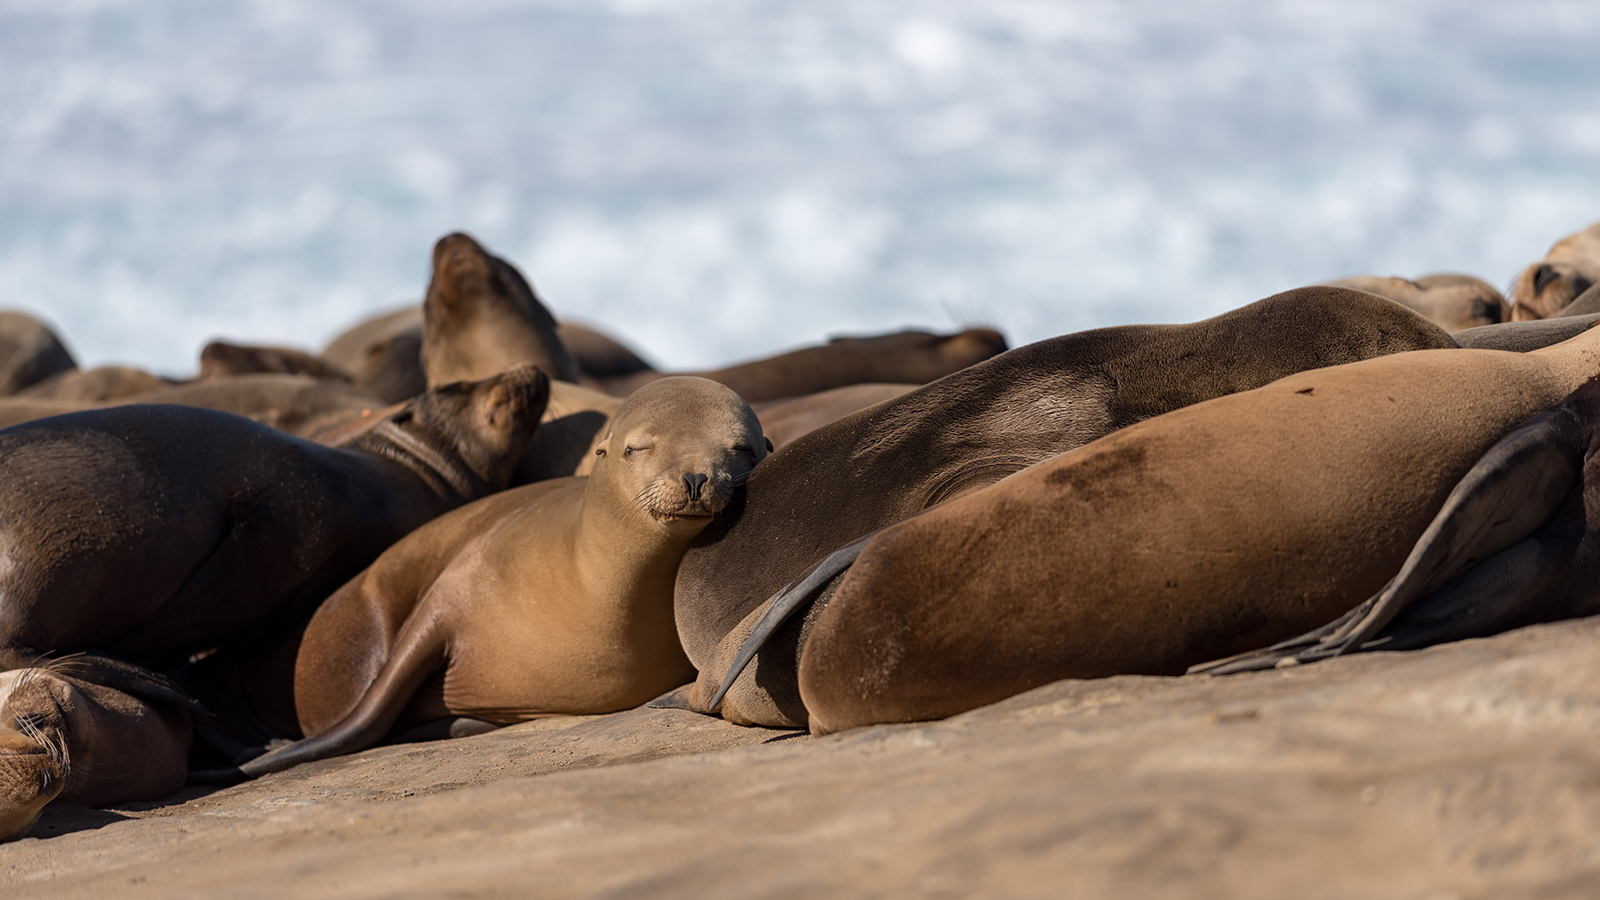 Sea Lions rest on the beach